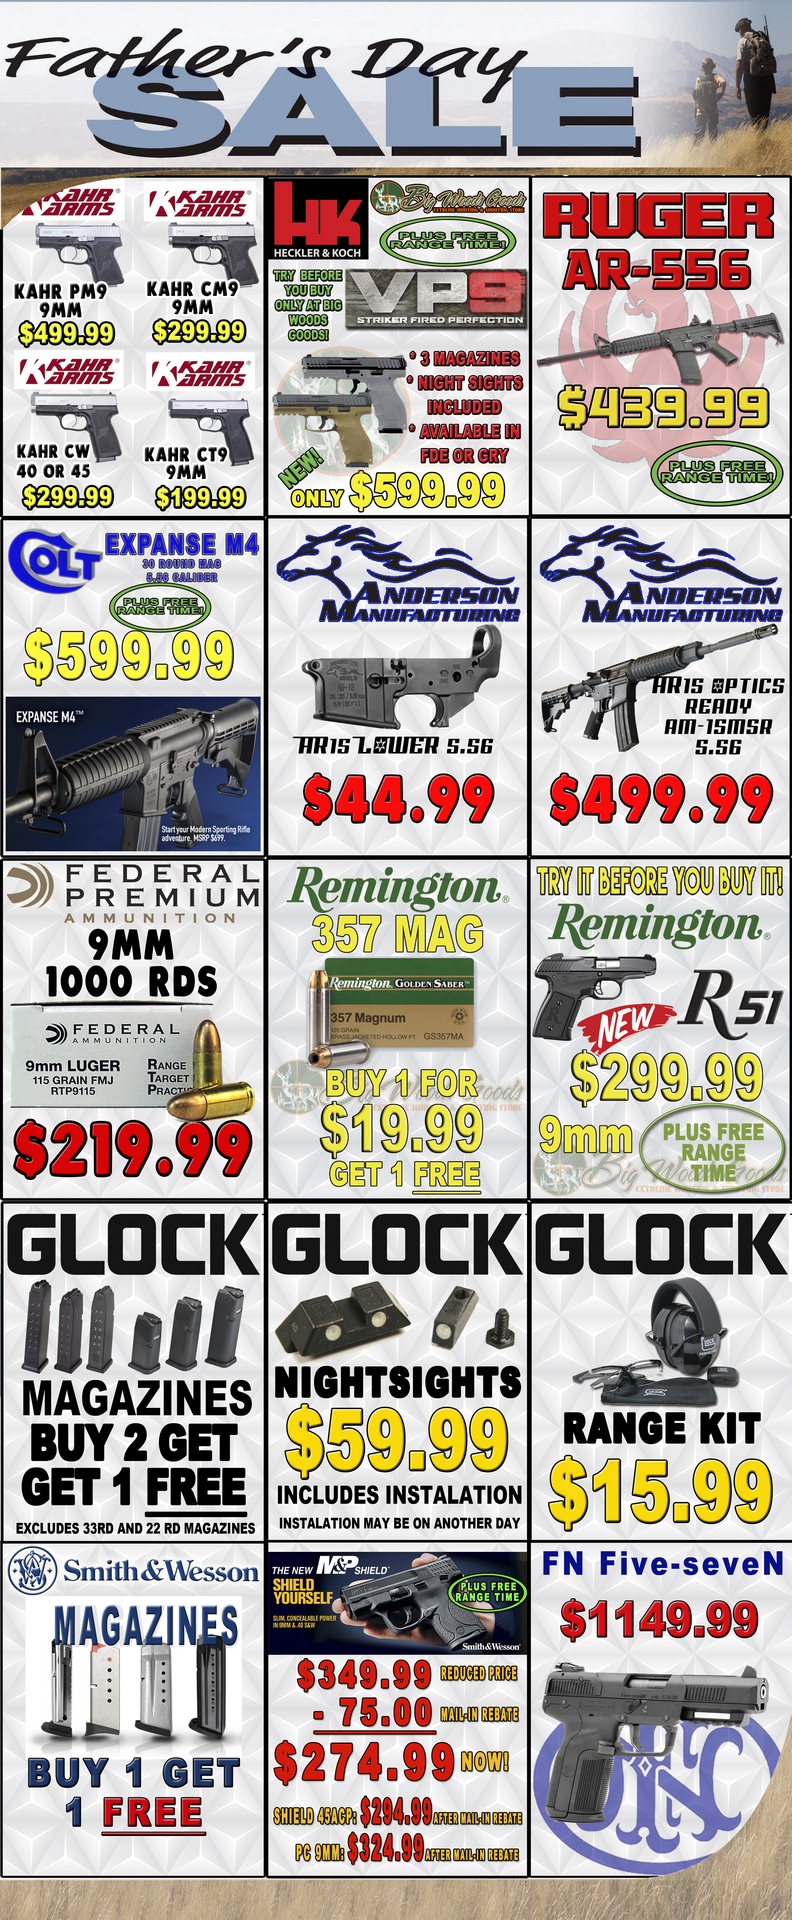 Fathers Day Specials on selected Kahr, HK, Ruger, Colt, Anderson Manufacturing, Glock, FN, Smith and Wesson products, and 9mm Federal and .357 magnum Remington ammunition